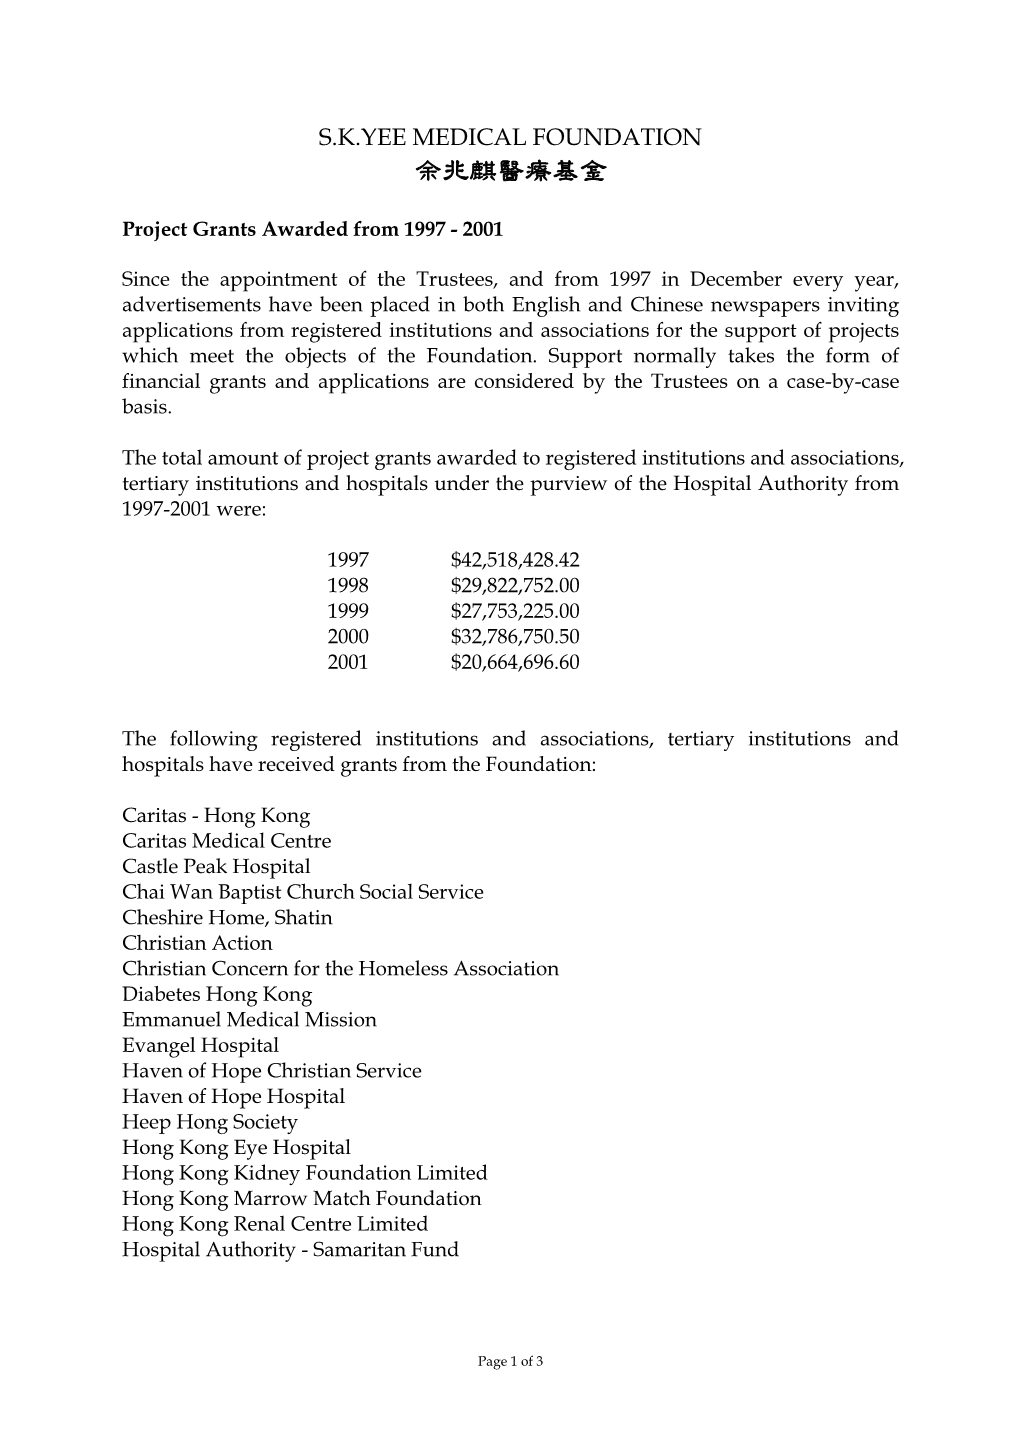 Project Grants Awarded from 1997 - 2001